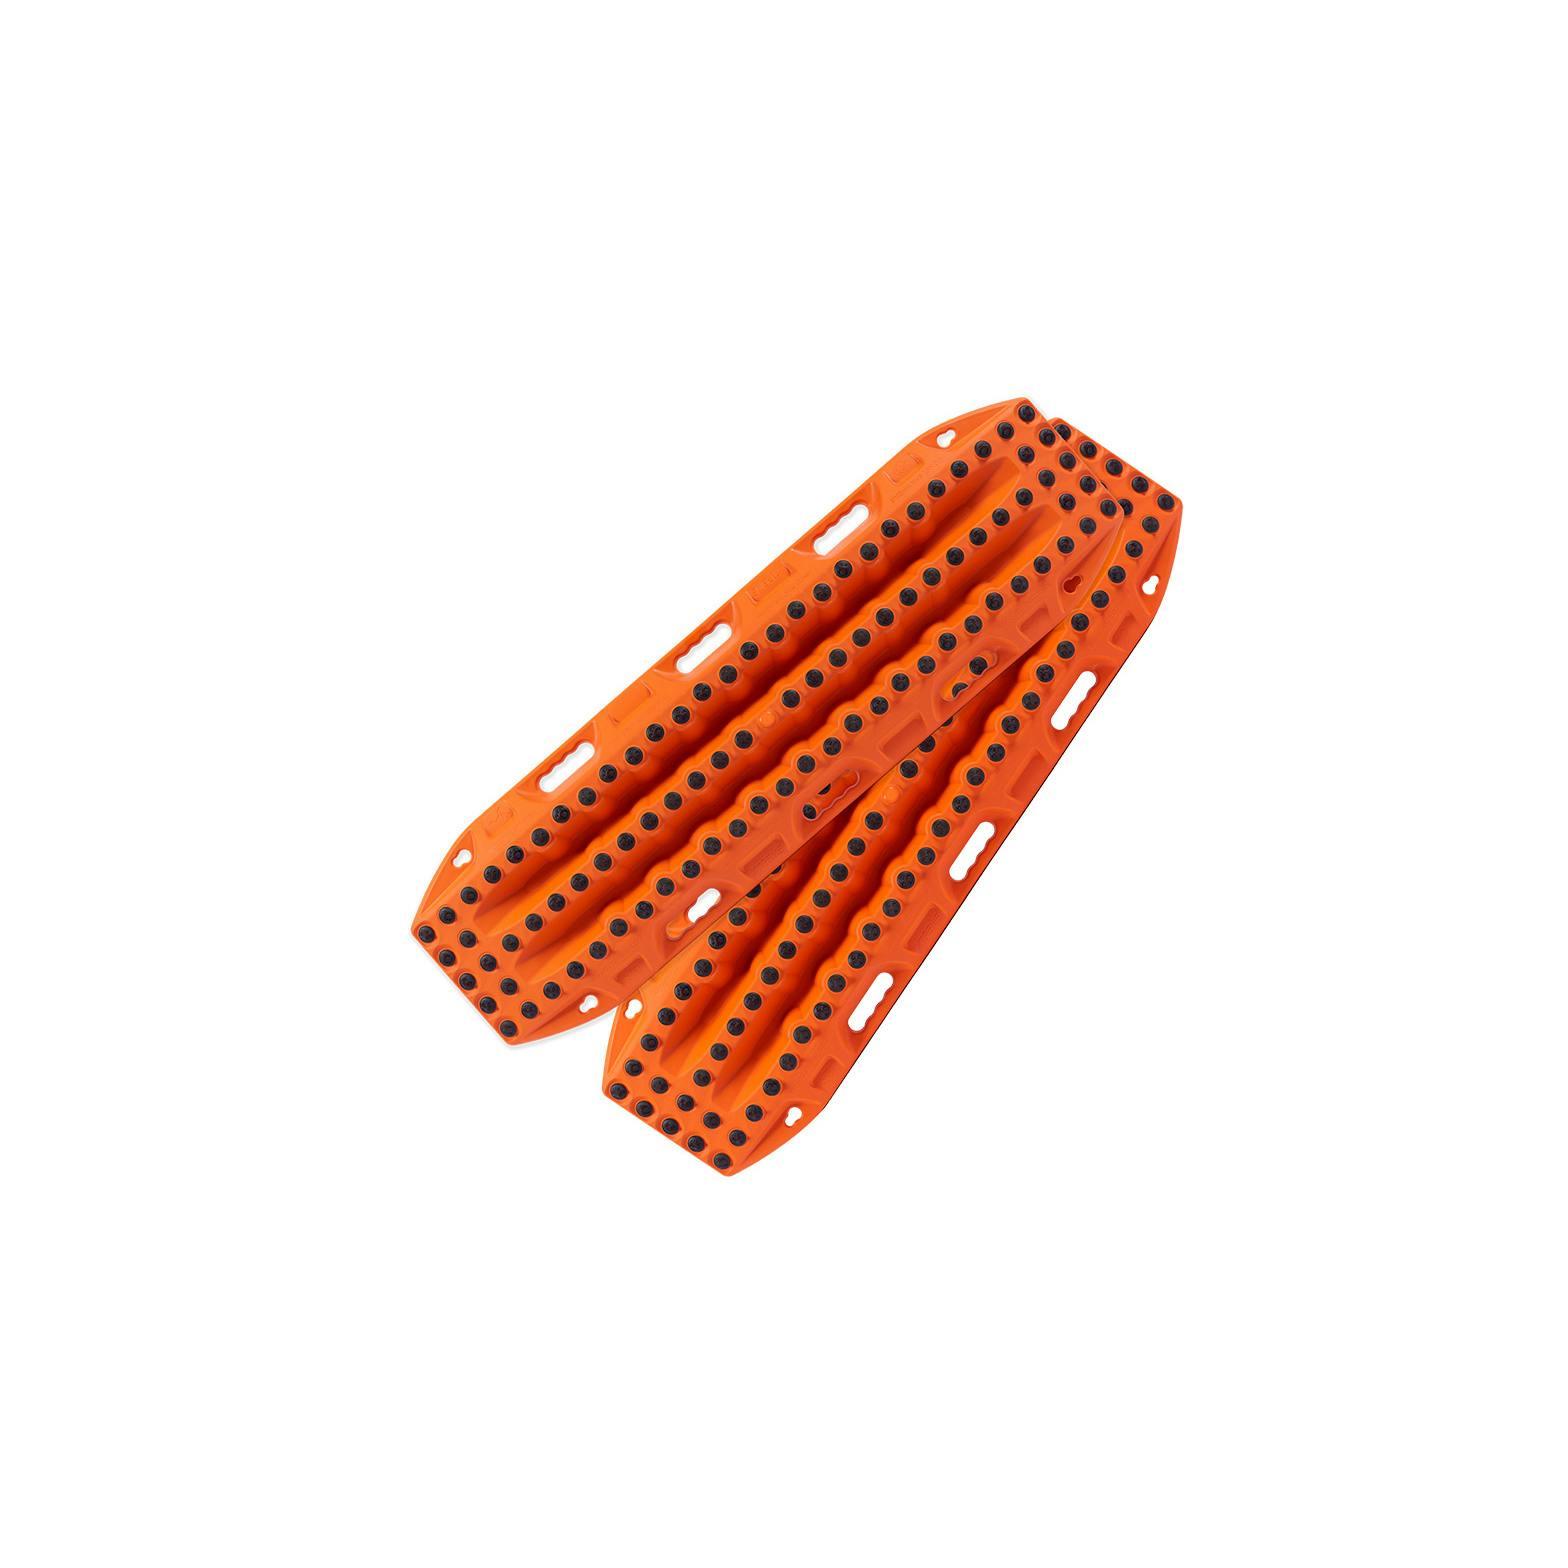 Maxtrax XTREME recovery board in signature orange on white background